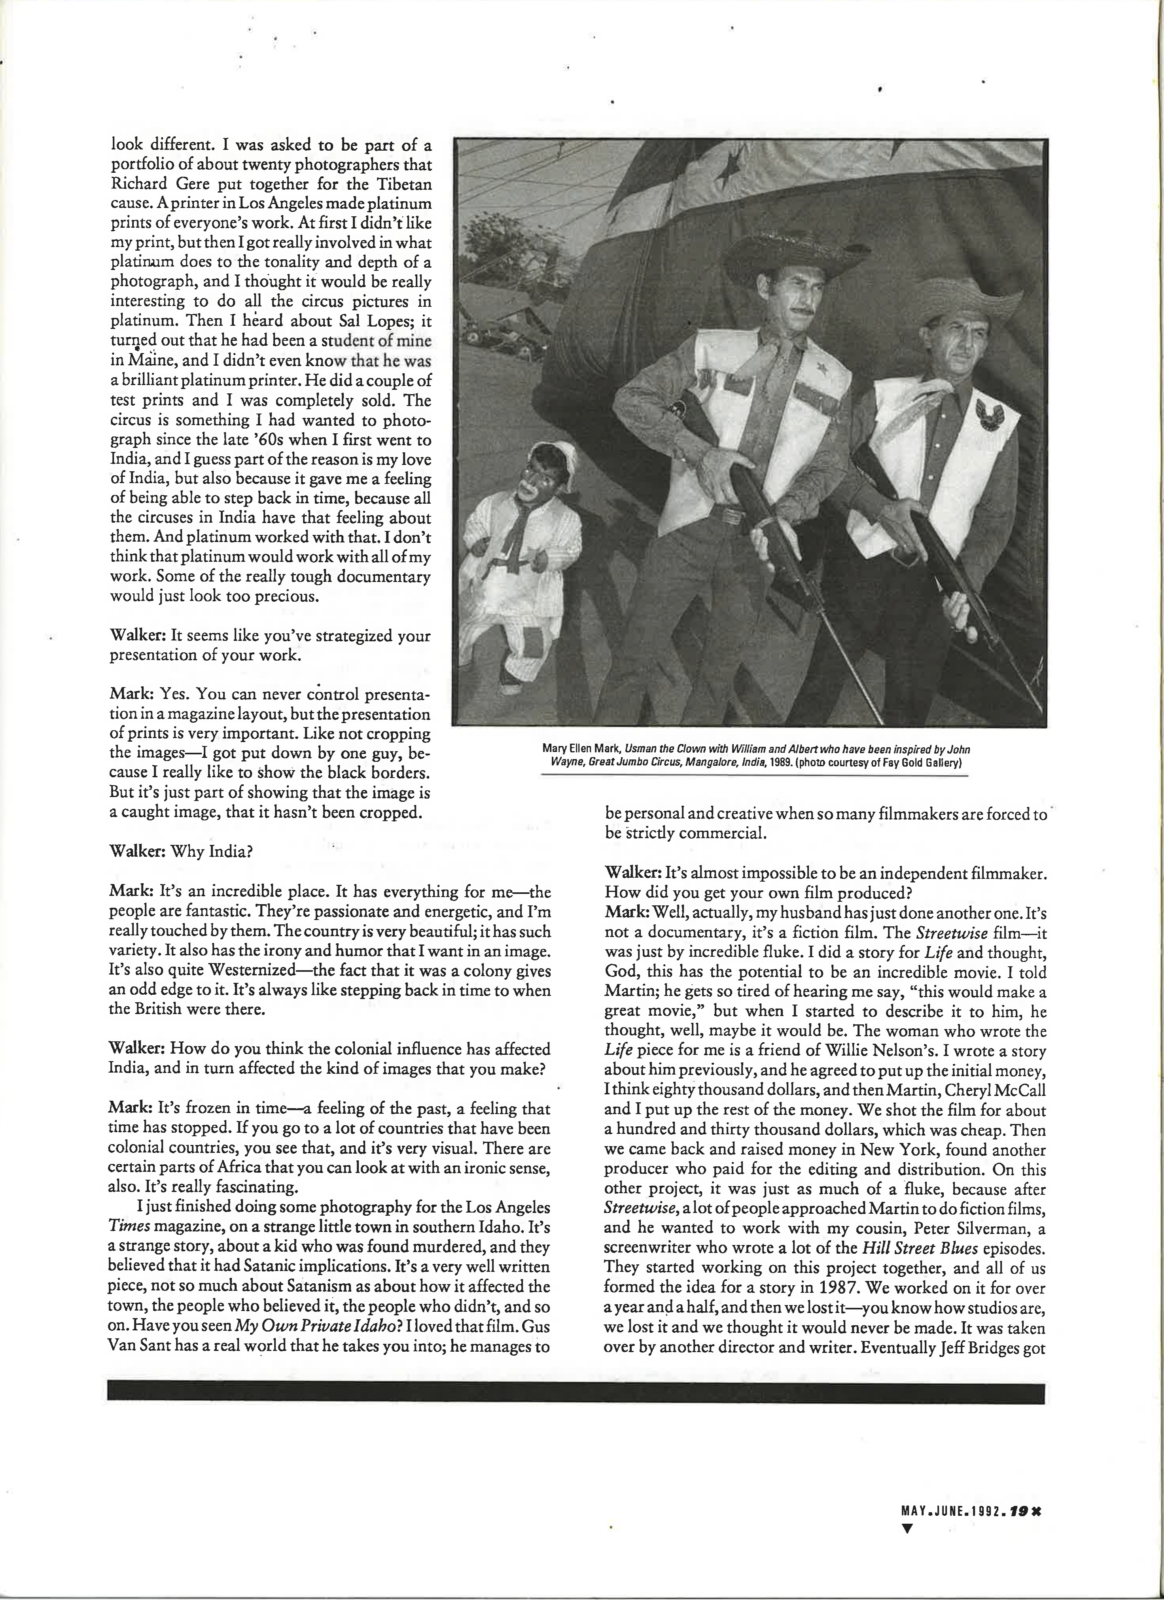 A black and white scan of the May/June 1992 edition of Art Papers featuring a black and white image at the top right of the page.